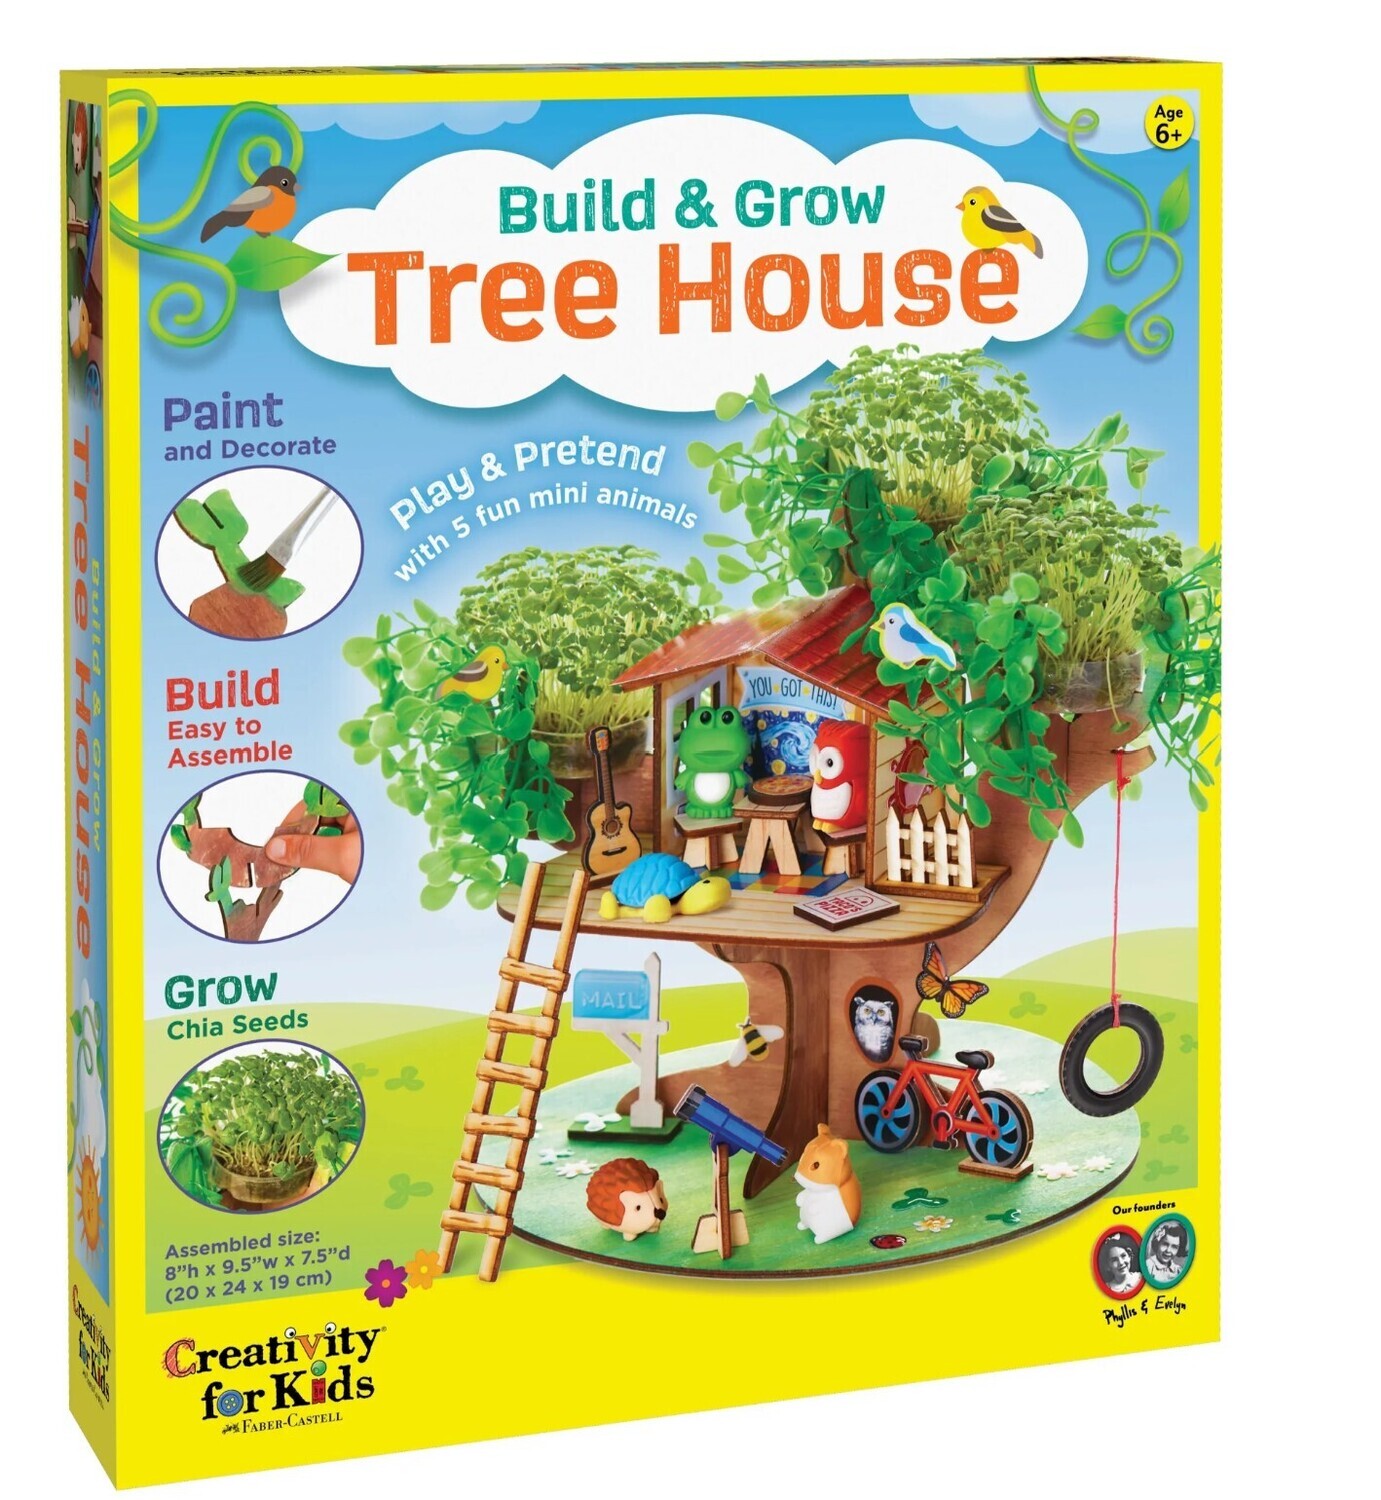 Build and Grow Treehouse